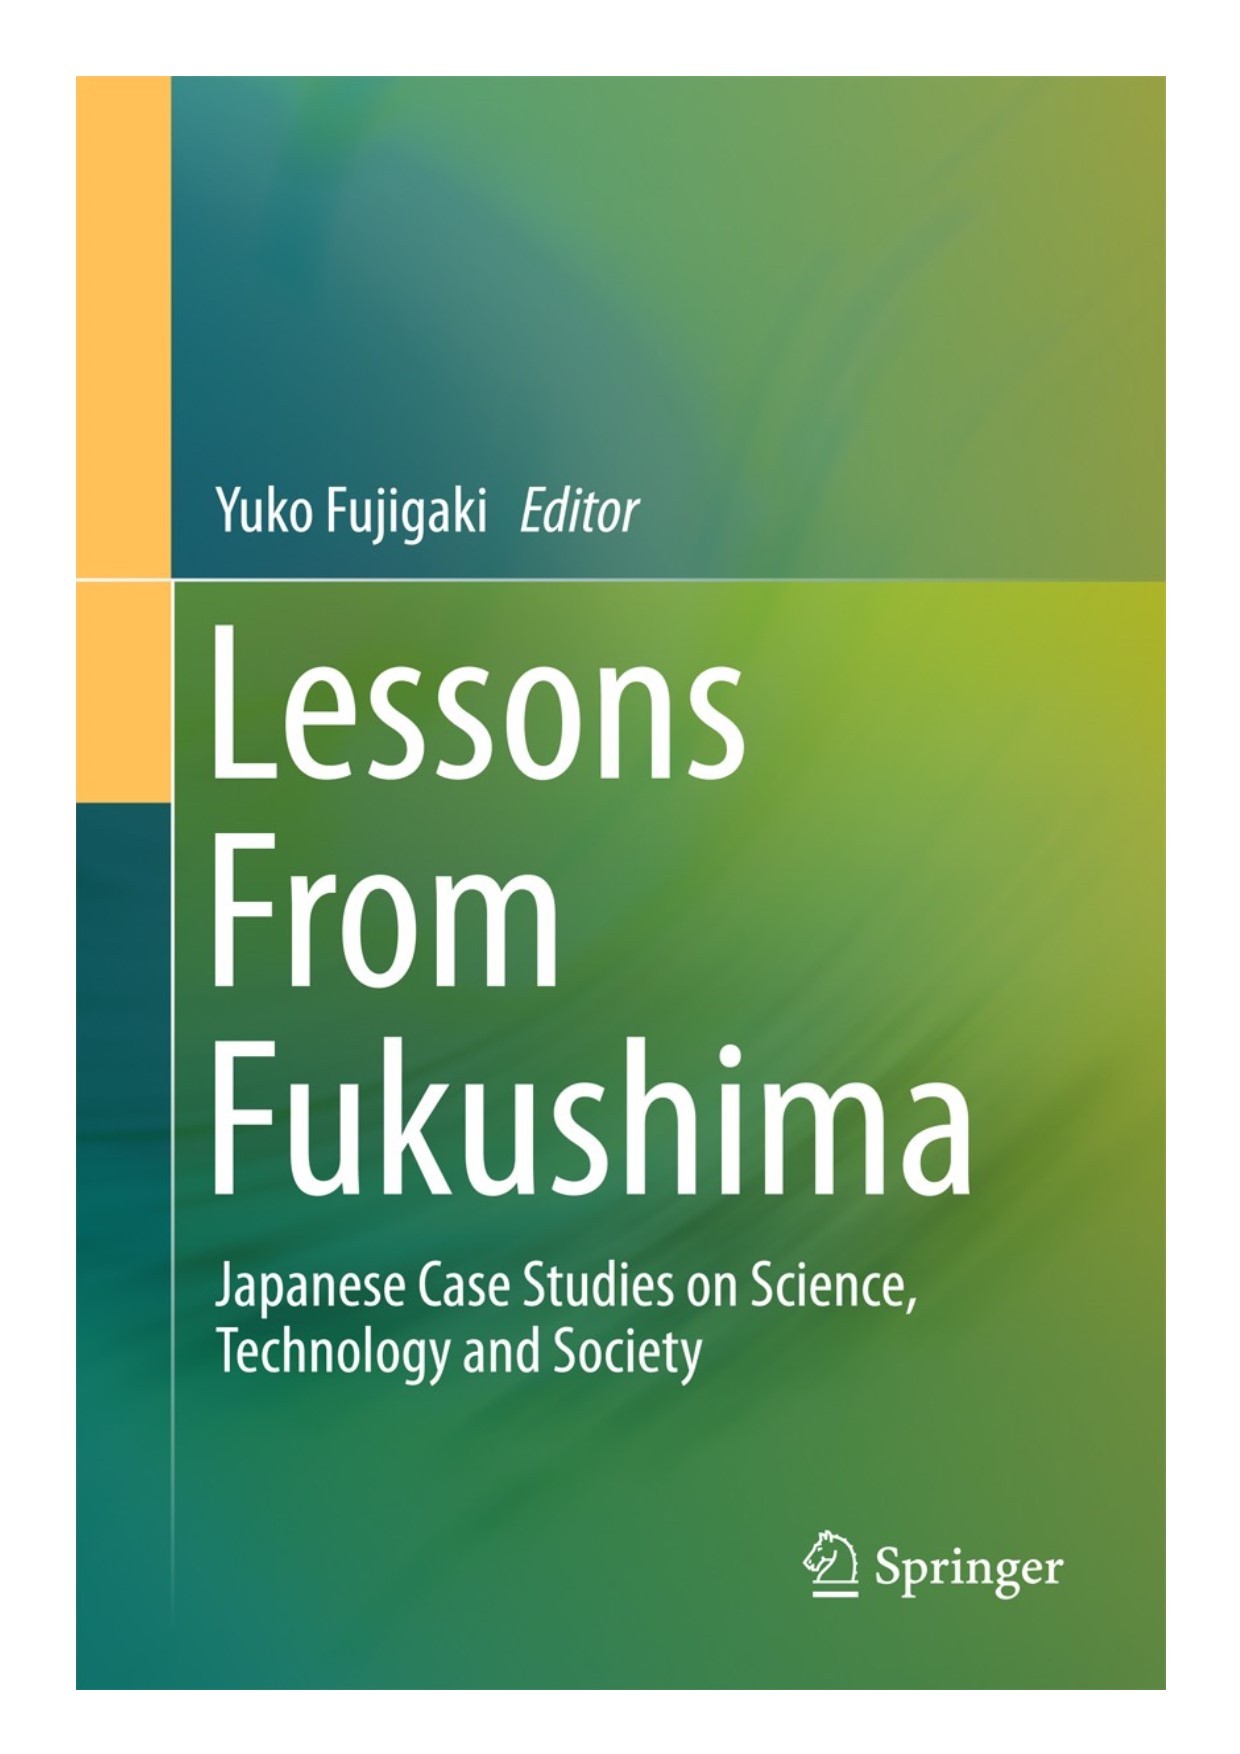 Lessons from Fukushima Japanese case studies on science, technology and society